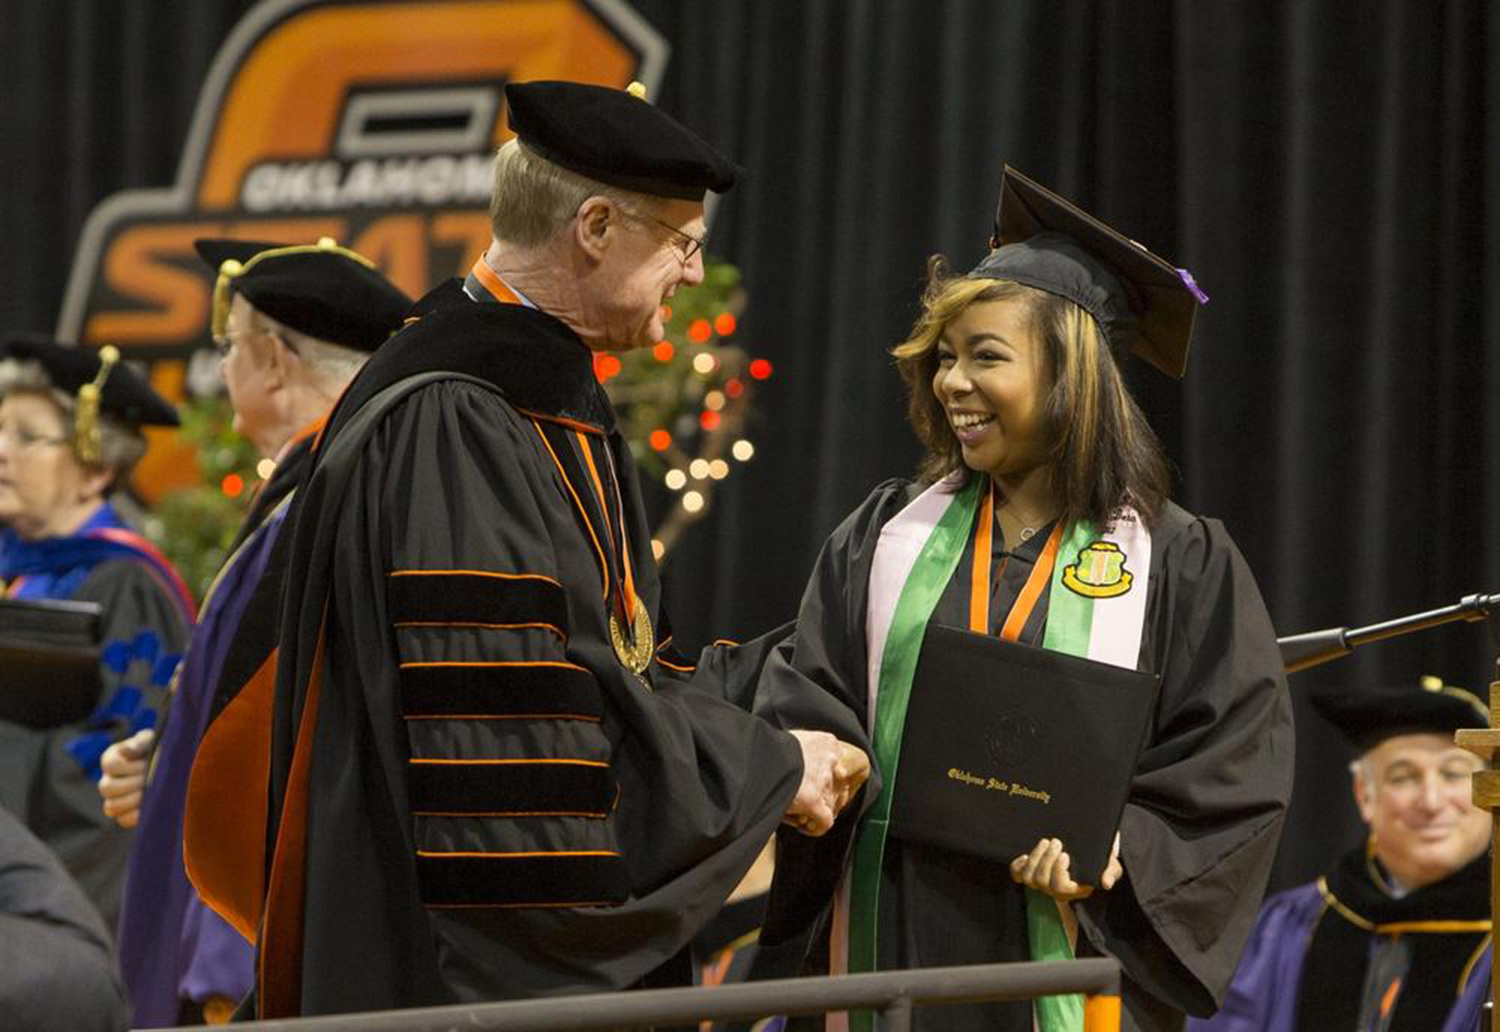 Oklahoma State University President Burns Hargis congratulates a graduate during OSU’s undergraduate commencement ceremonies Saturday at Gallagher-Iba Arena in Stillwater. More than 1,700 graduates were recognized during Graduate College and undergraduate ceremonies Friday and Saturday.